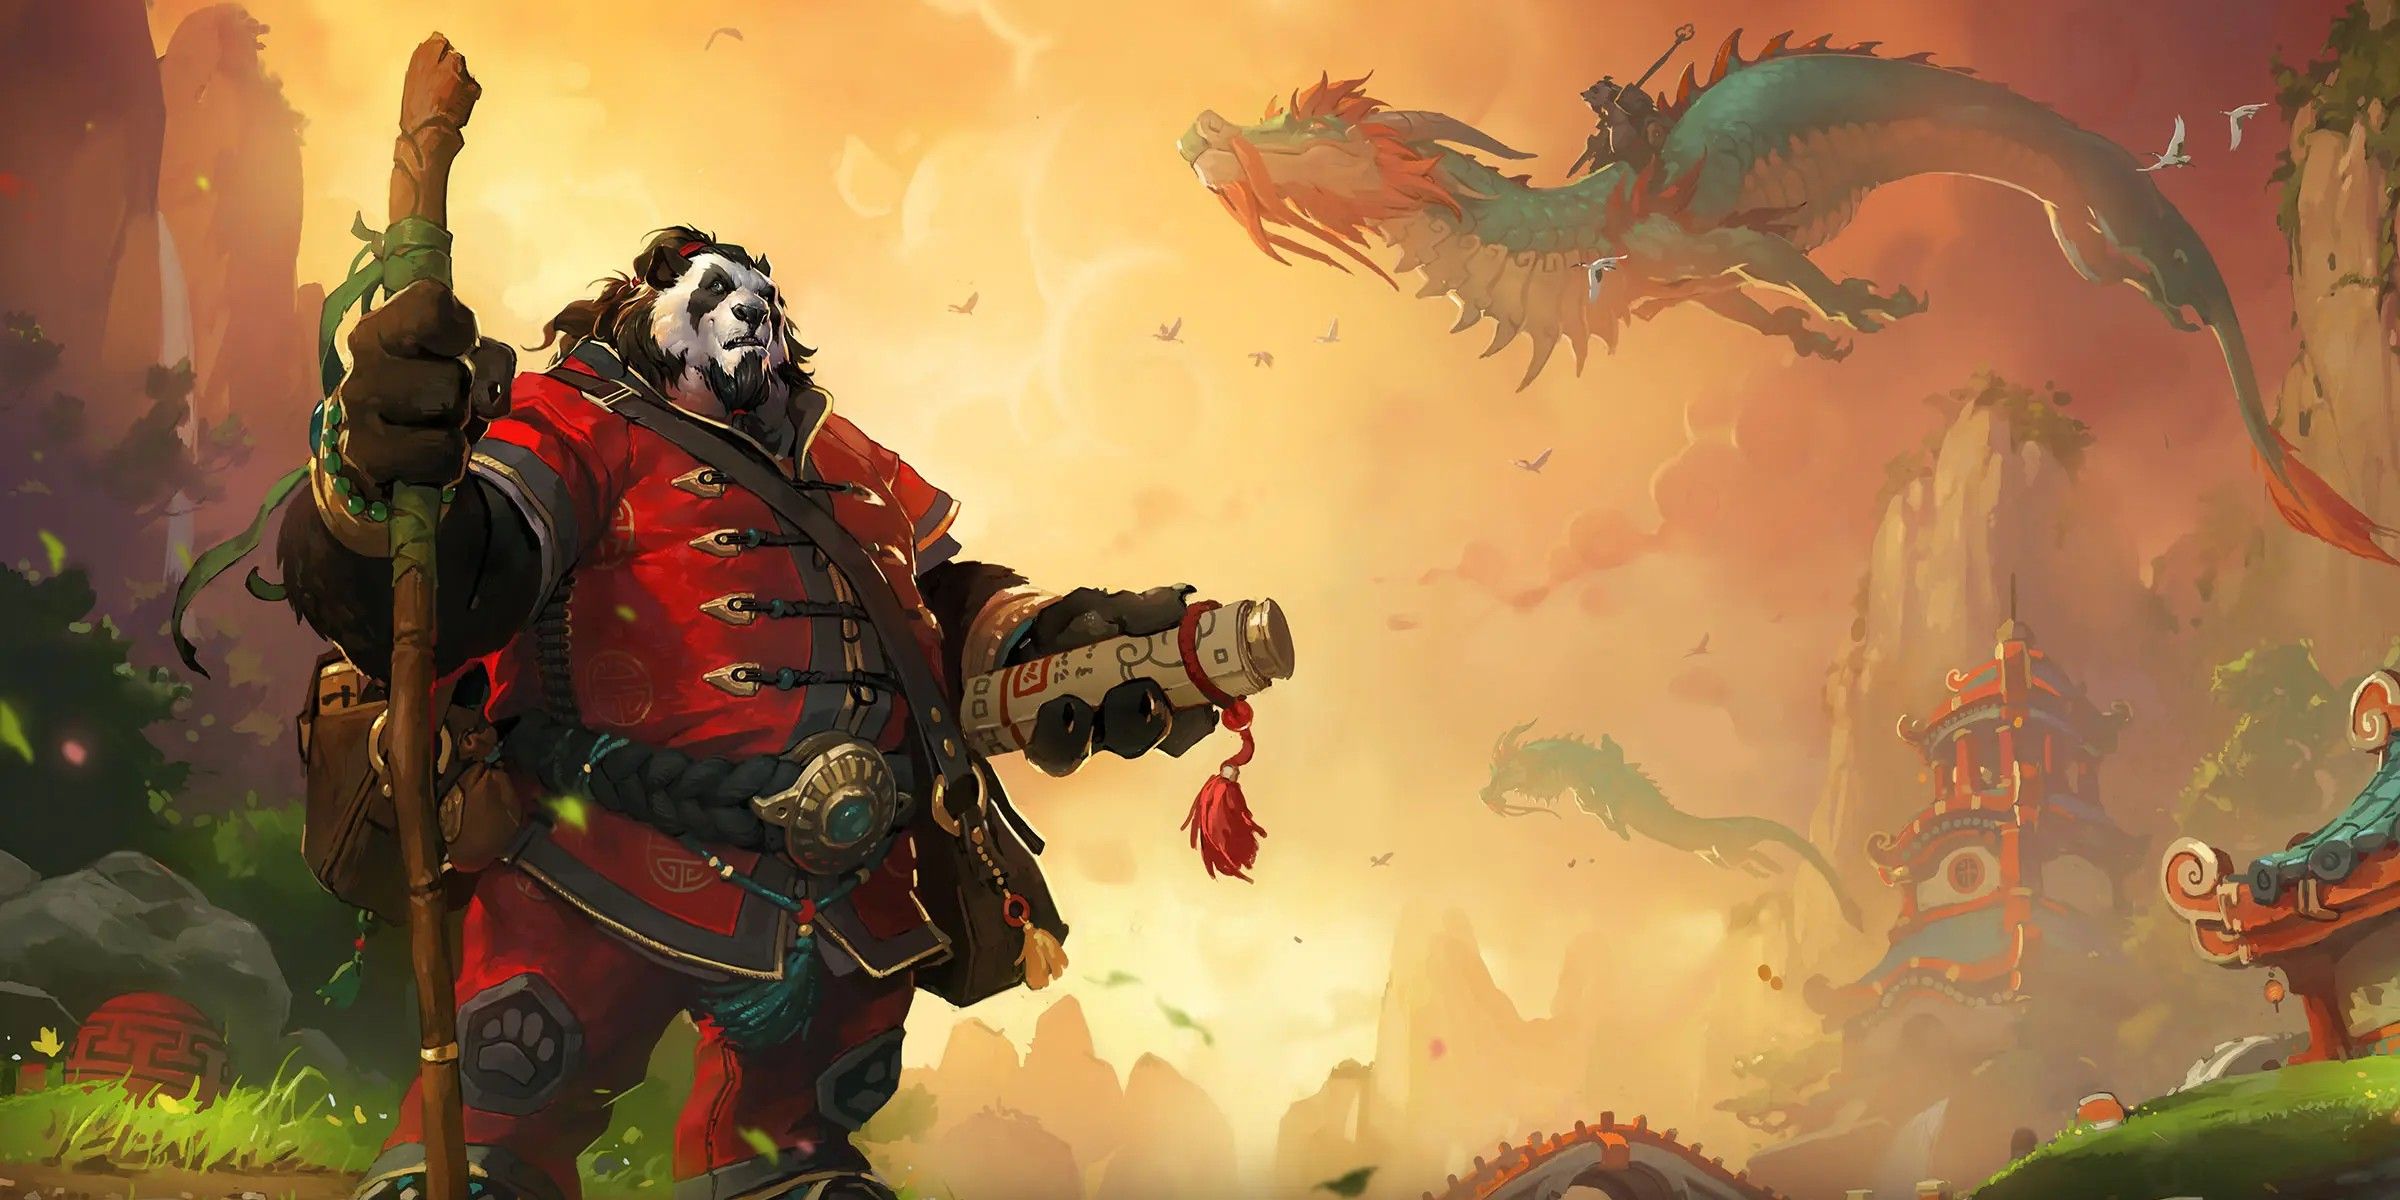 The Lore of World of Warcraft Mists of Pandaria